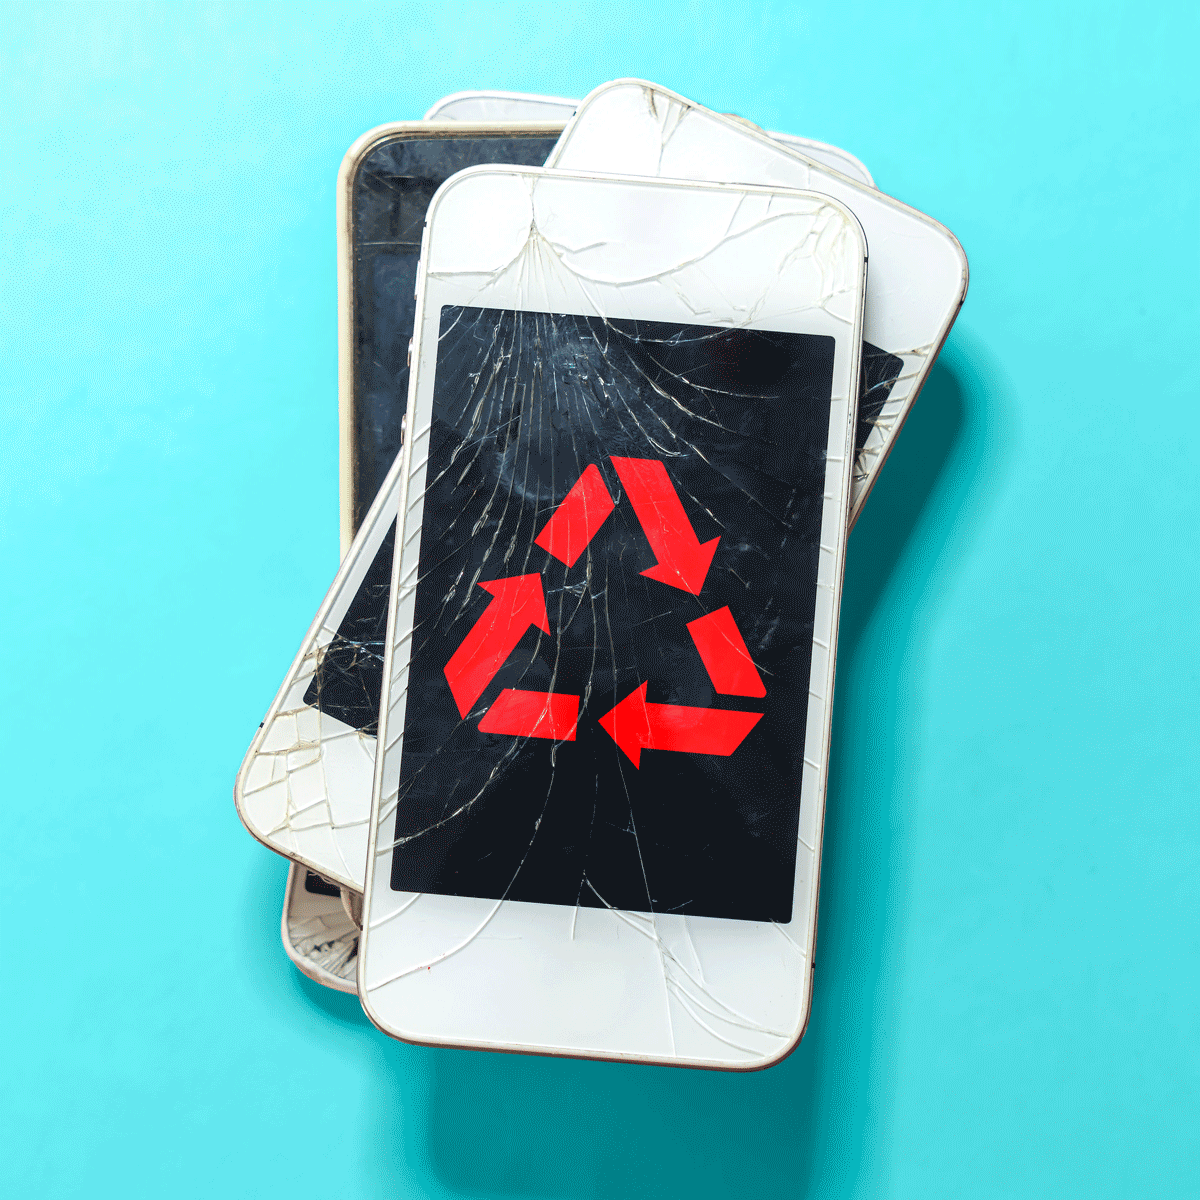 Getting Rid of an Old Cellphone? Do This First or Risk Getting Hacked